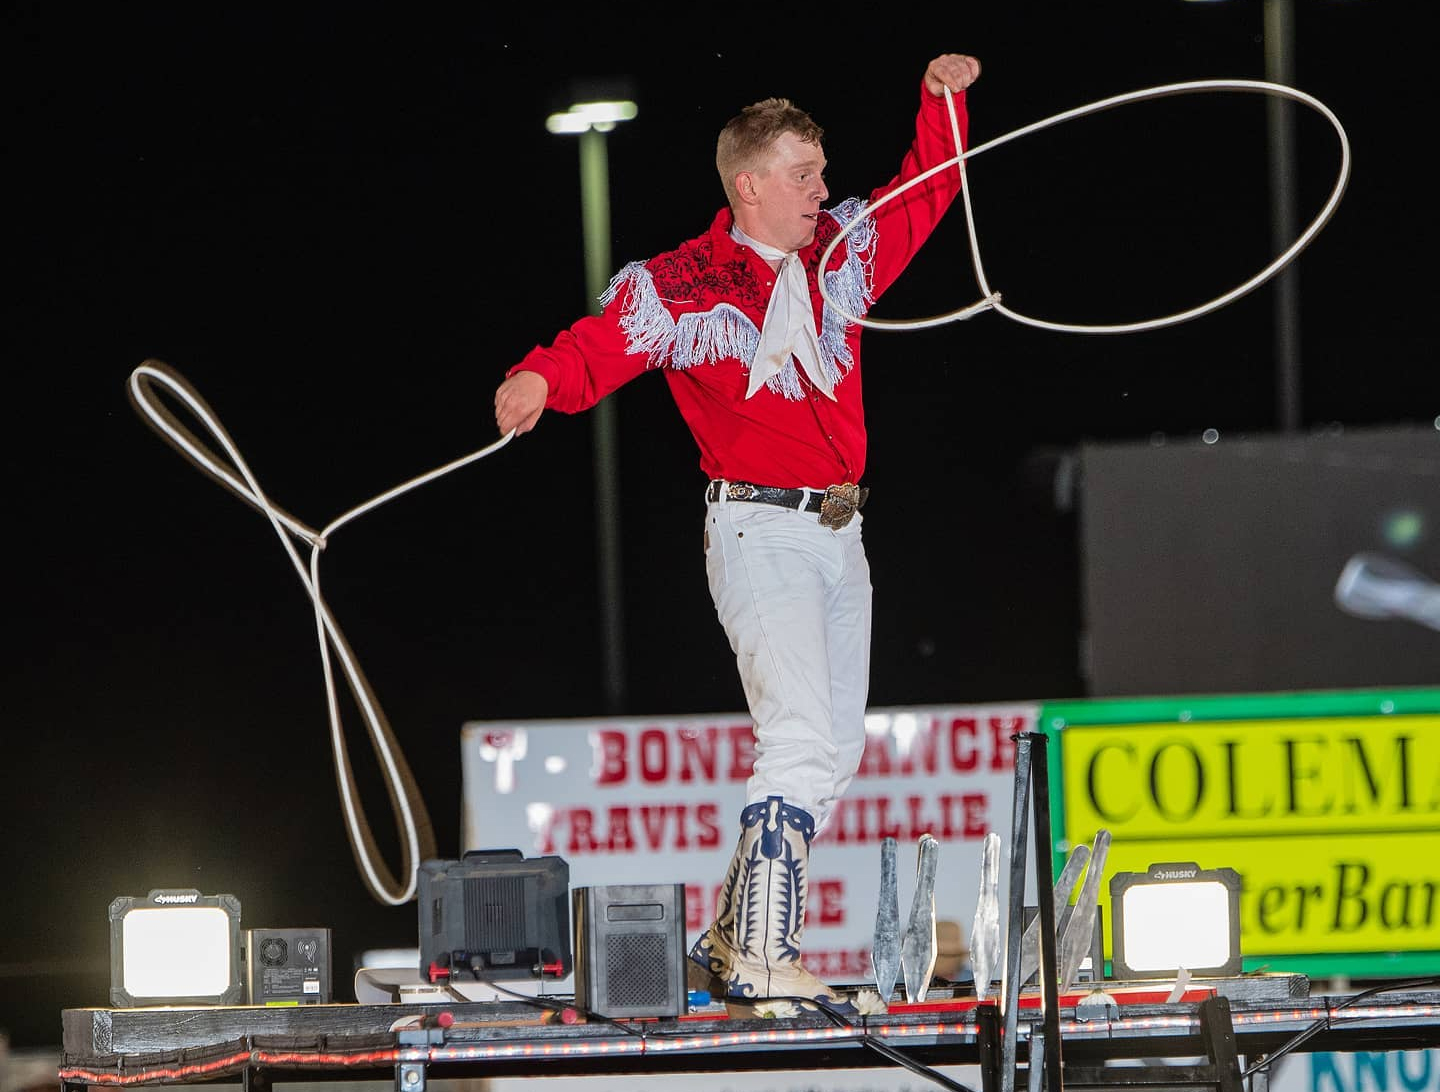 Rider Kiesner will be the featured entertainer during the Chisholm Trail RAM Prairie Circuit Finals Rodeo, set for Oct. 16-17 in Duncan, Oklahoma.